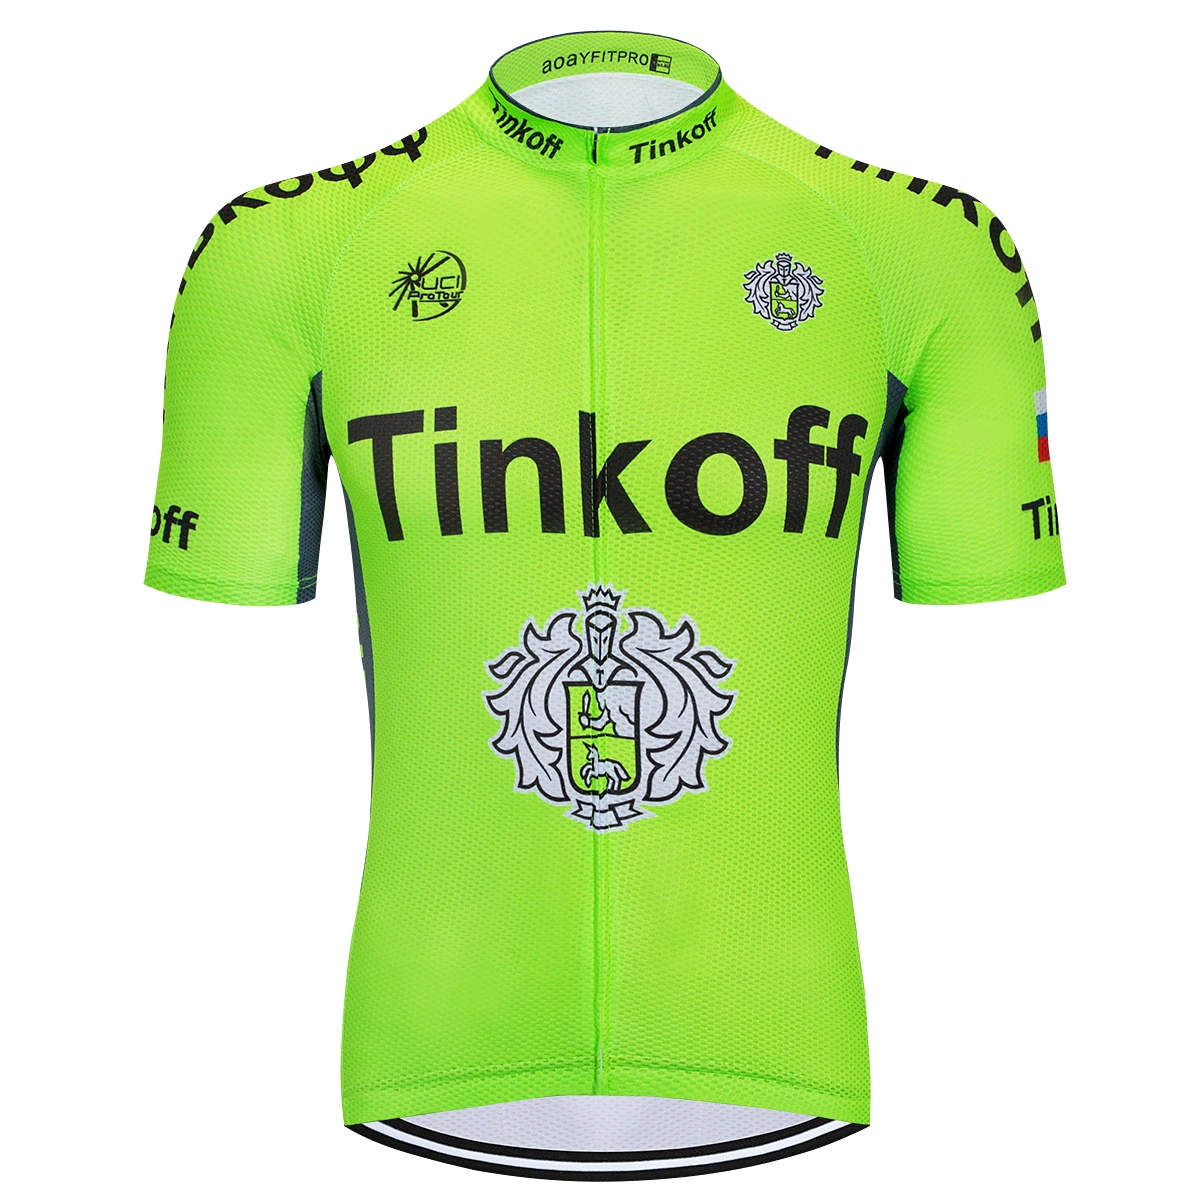 Tinkoff Sommeren Korte Ærmer Pro Cycling Jersey Mountain Cykel Tøj Maillot Ropa Ciclismo Racing Cykel Tøj Trøjer 3